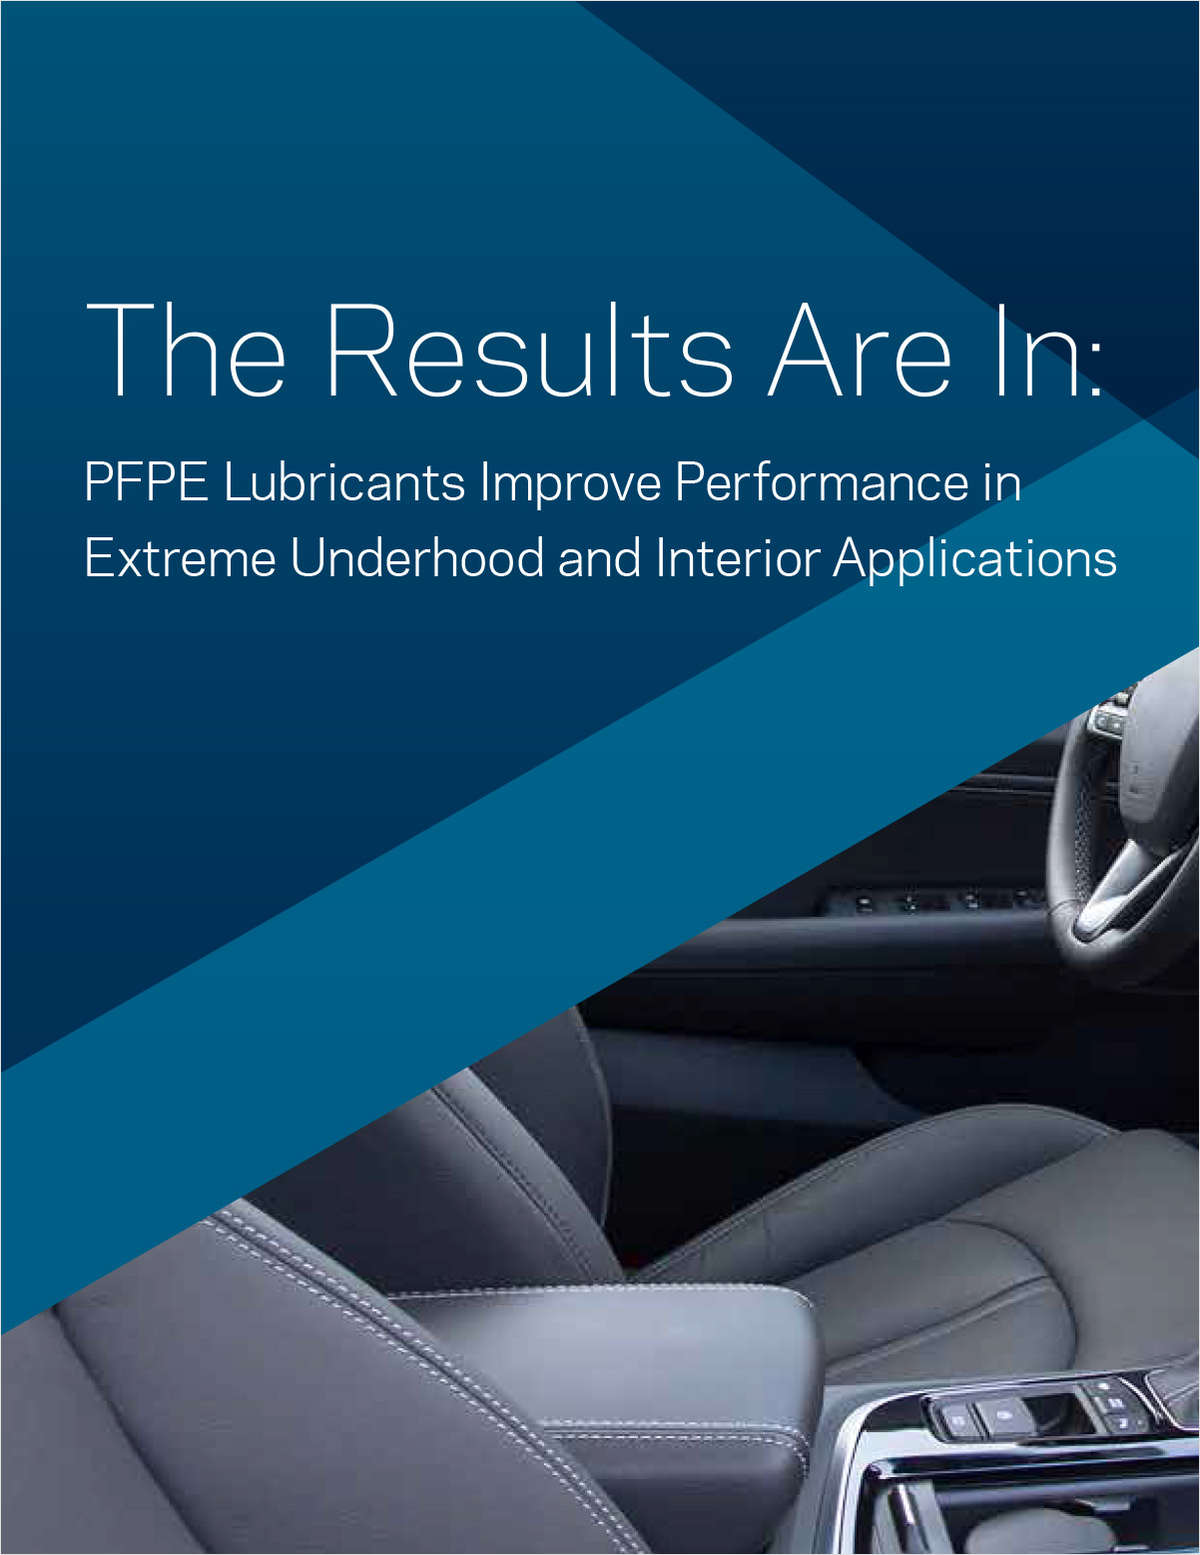 The Results Are In: PFPE Lubricants Improve Performance in Extreme Underhood and Interior Applications